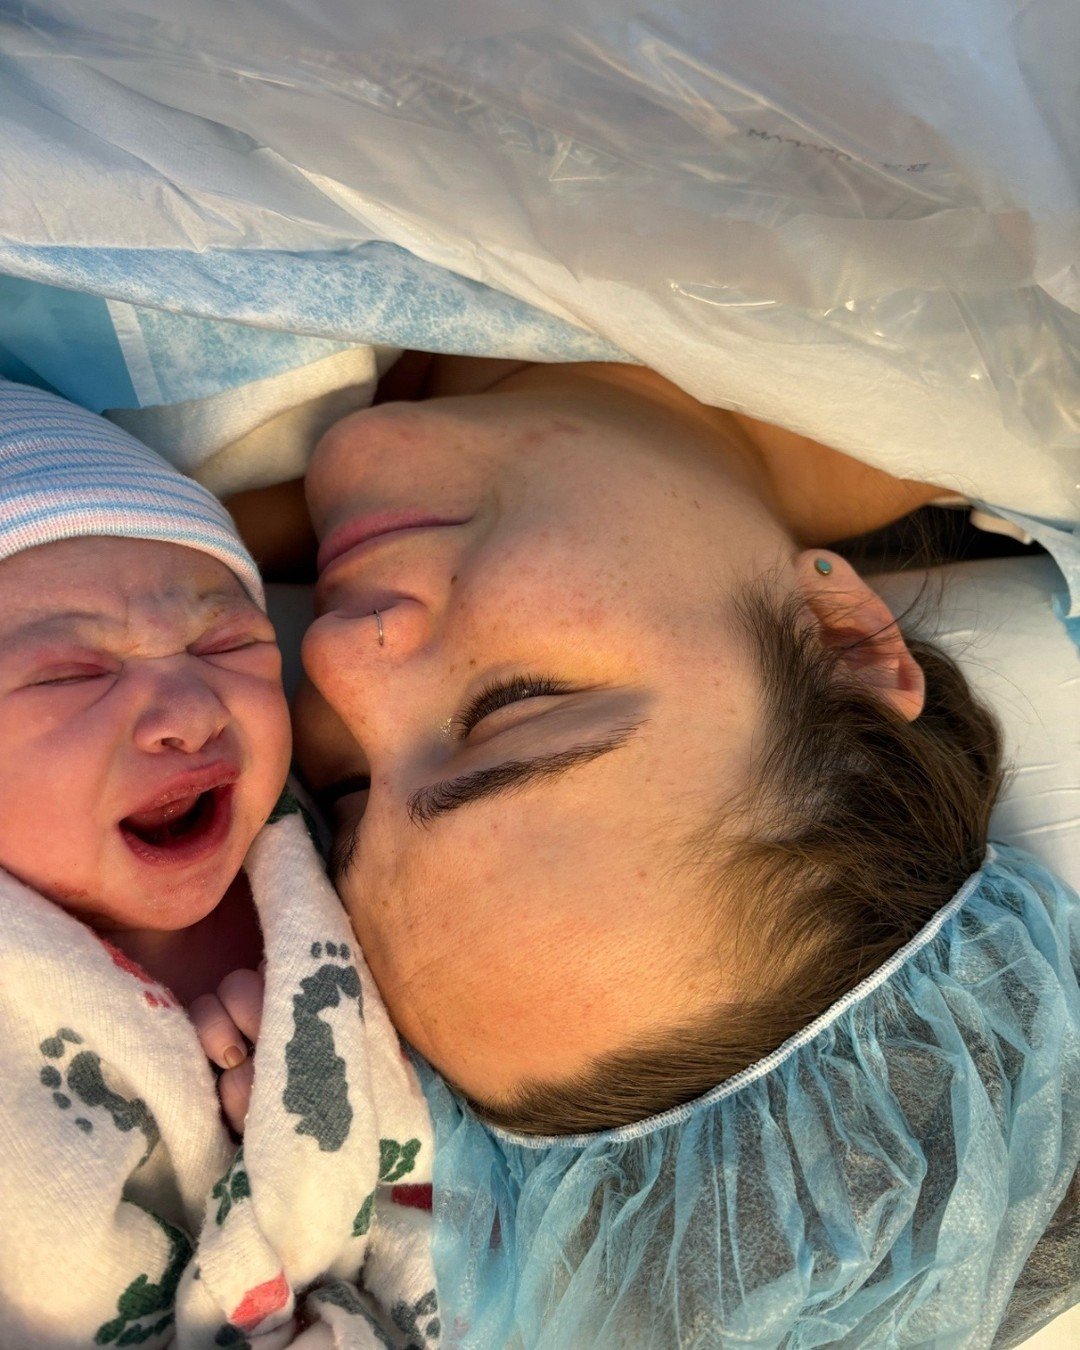 Welcome back from maternity leave, Lisa!

Lisa is excited to get back to CB&amp;W and wanted to share an update about her birth journey with our community.

&ldquo;After some unexpected twists and turns (you know the feeling if you&rsquo;ve ever done